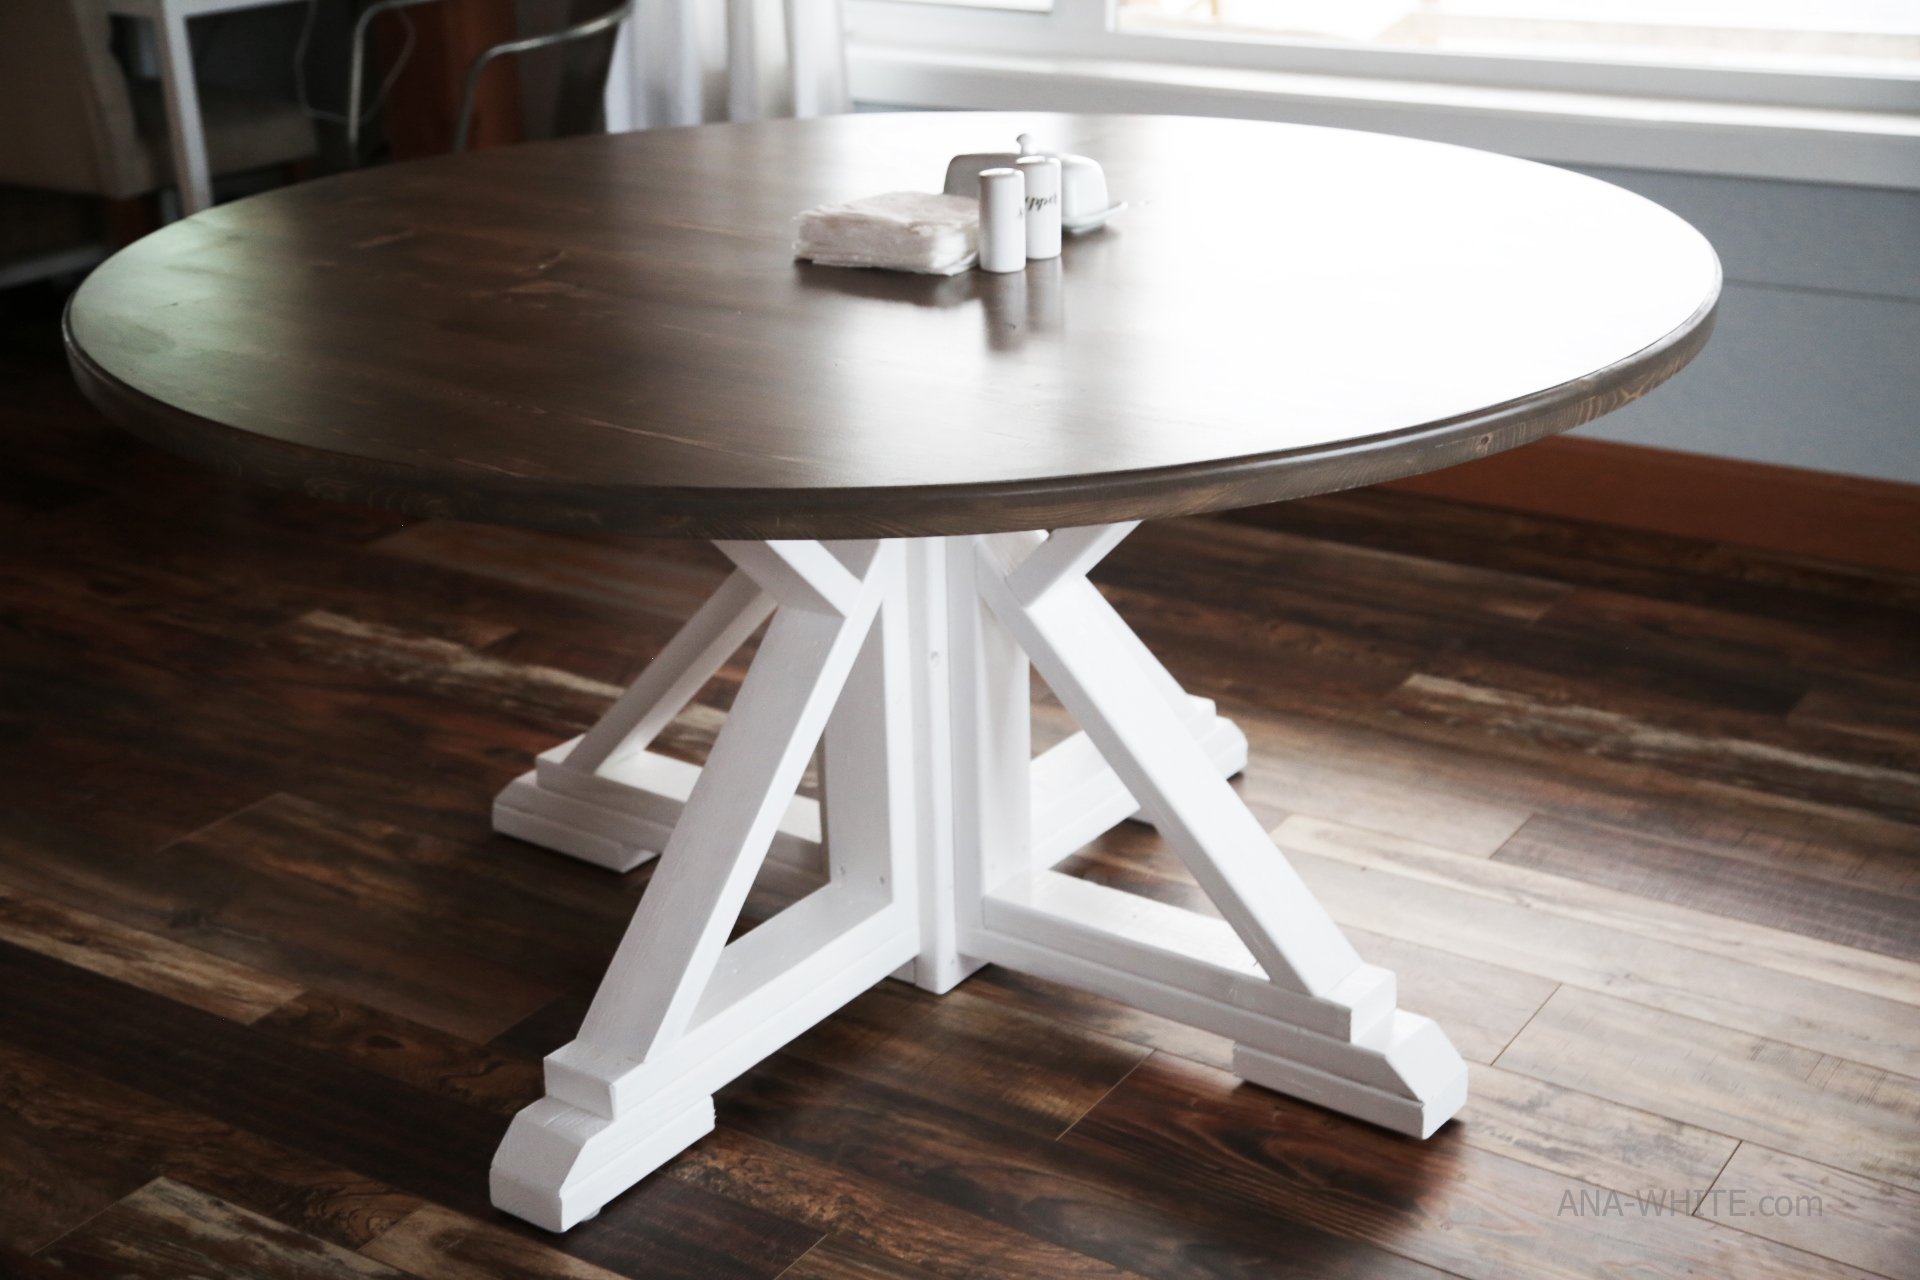 Round Modern Dining Table Base Ana White, How To Make A Circular Table Base